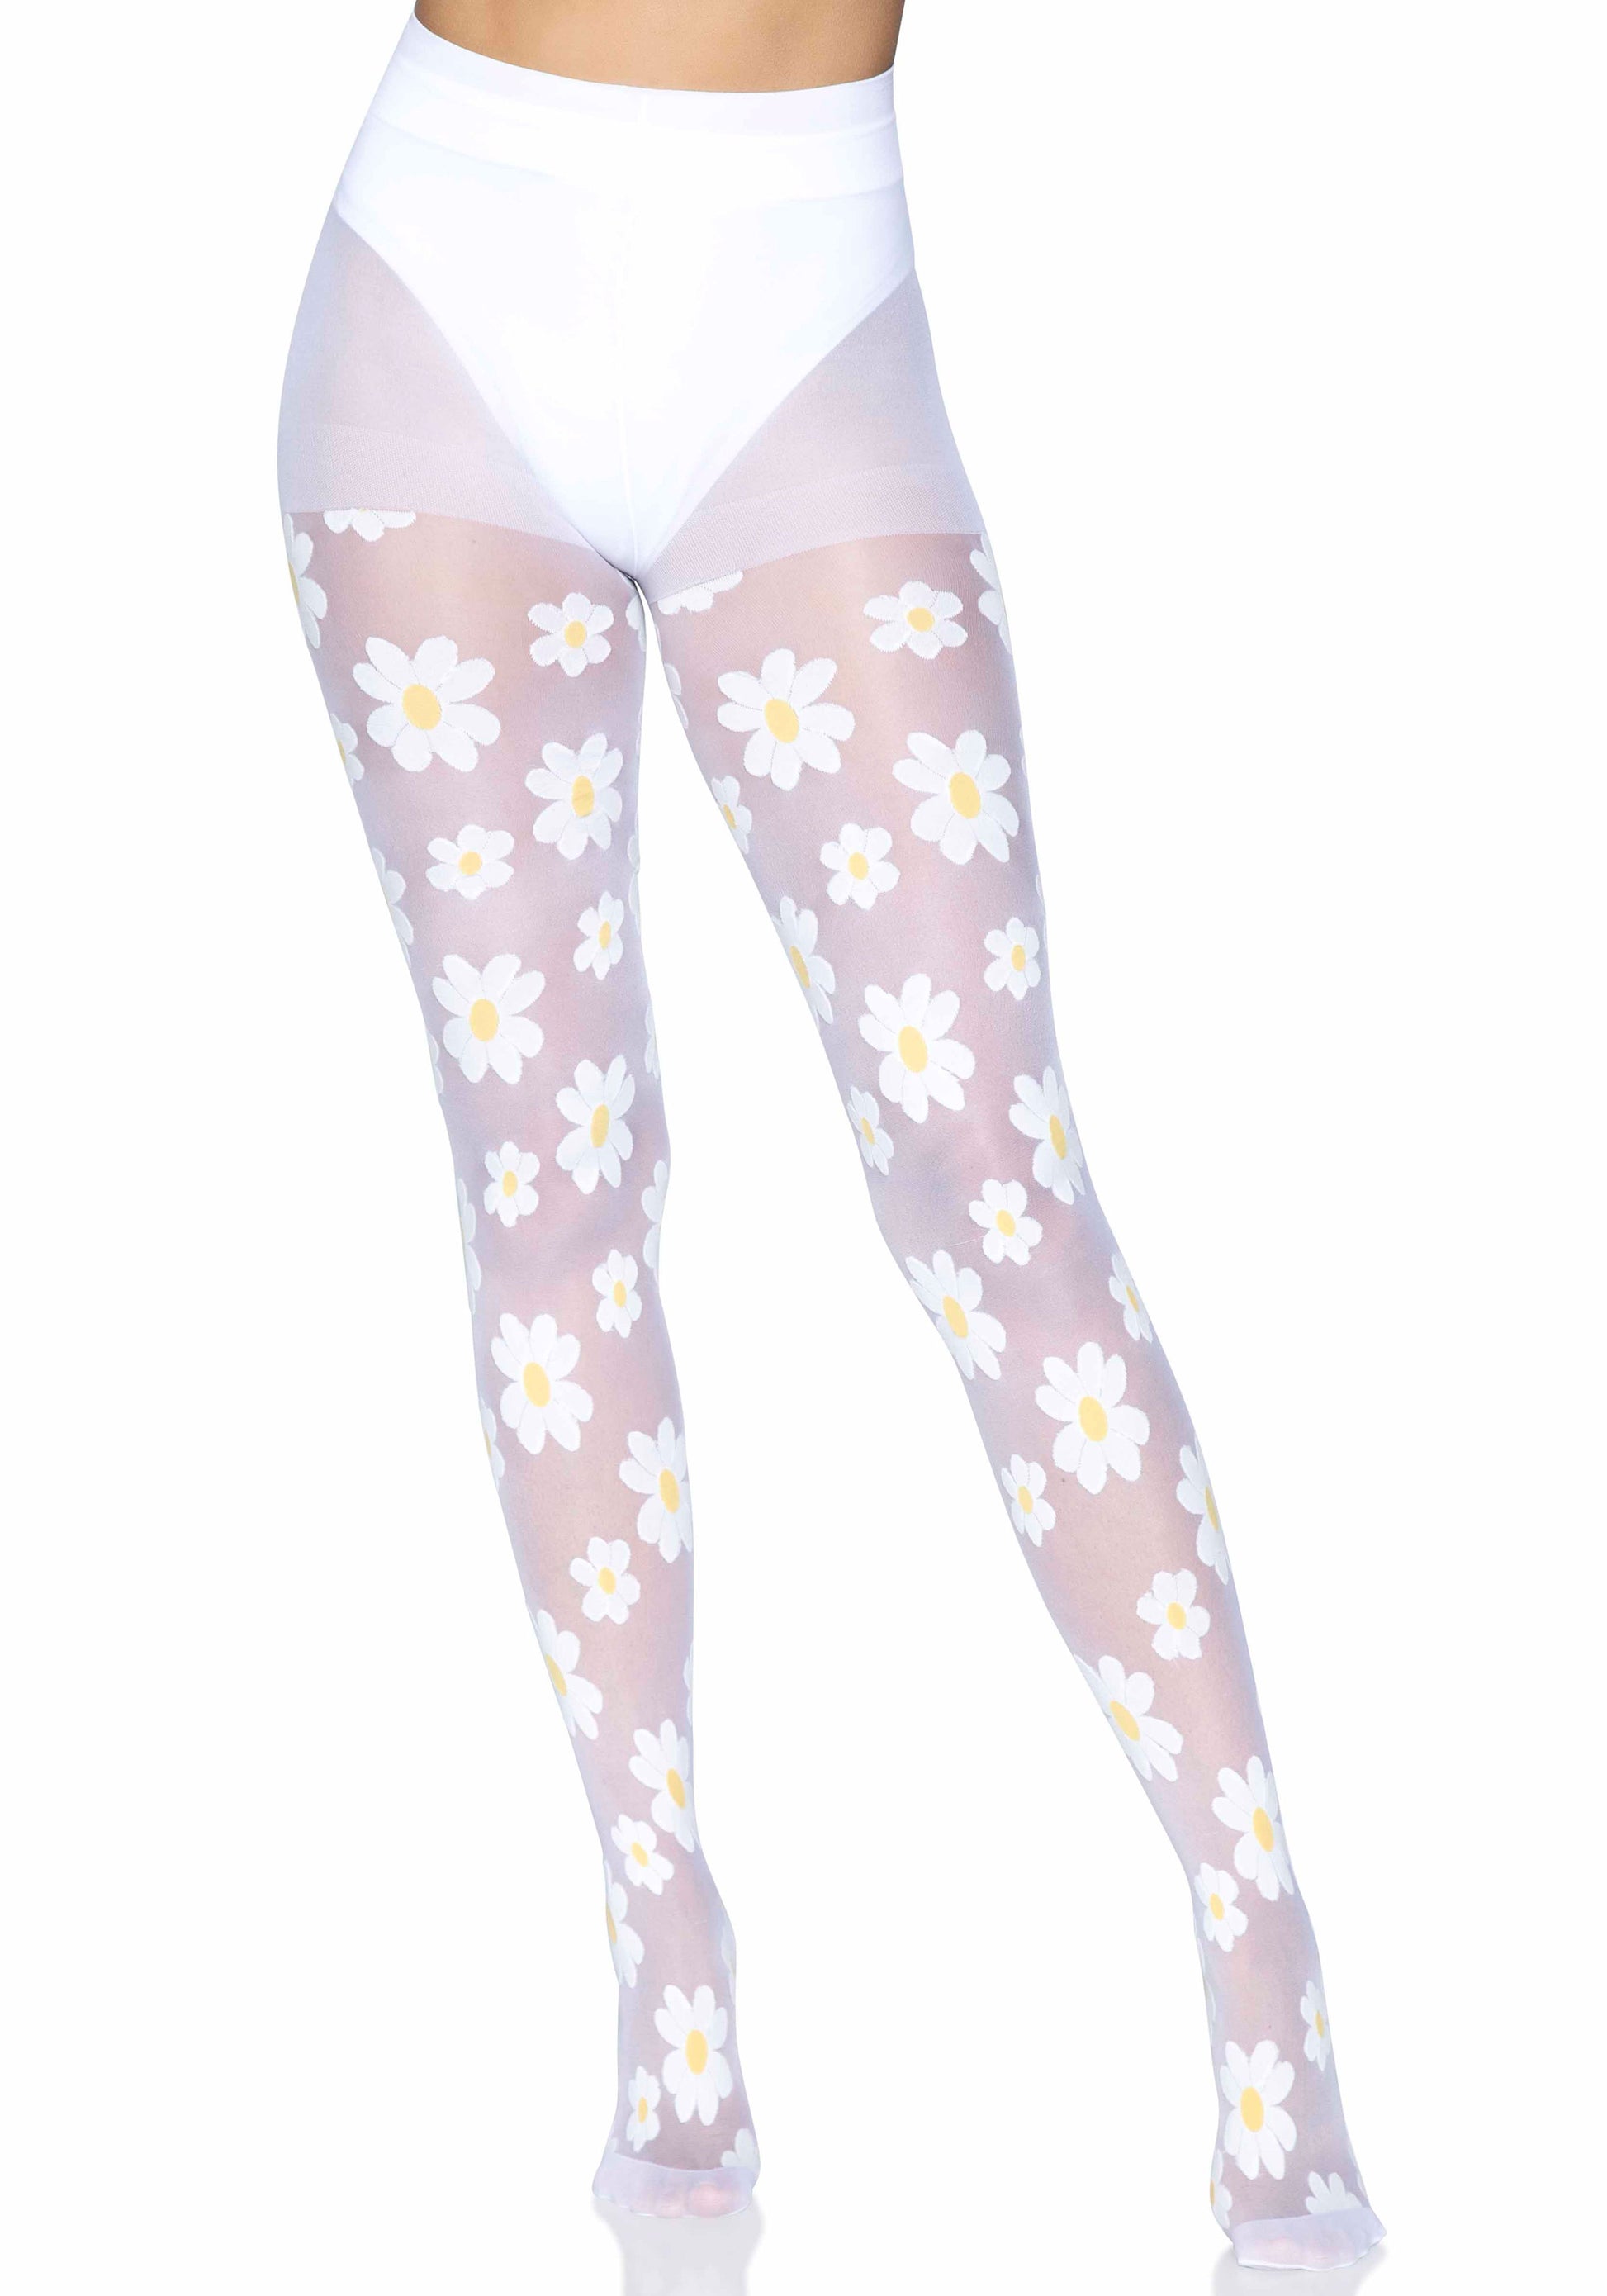 Leg Avenue 7752 Sheer white tights with a woven daisy flower pattern.